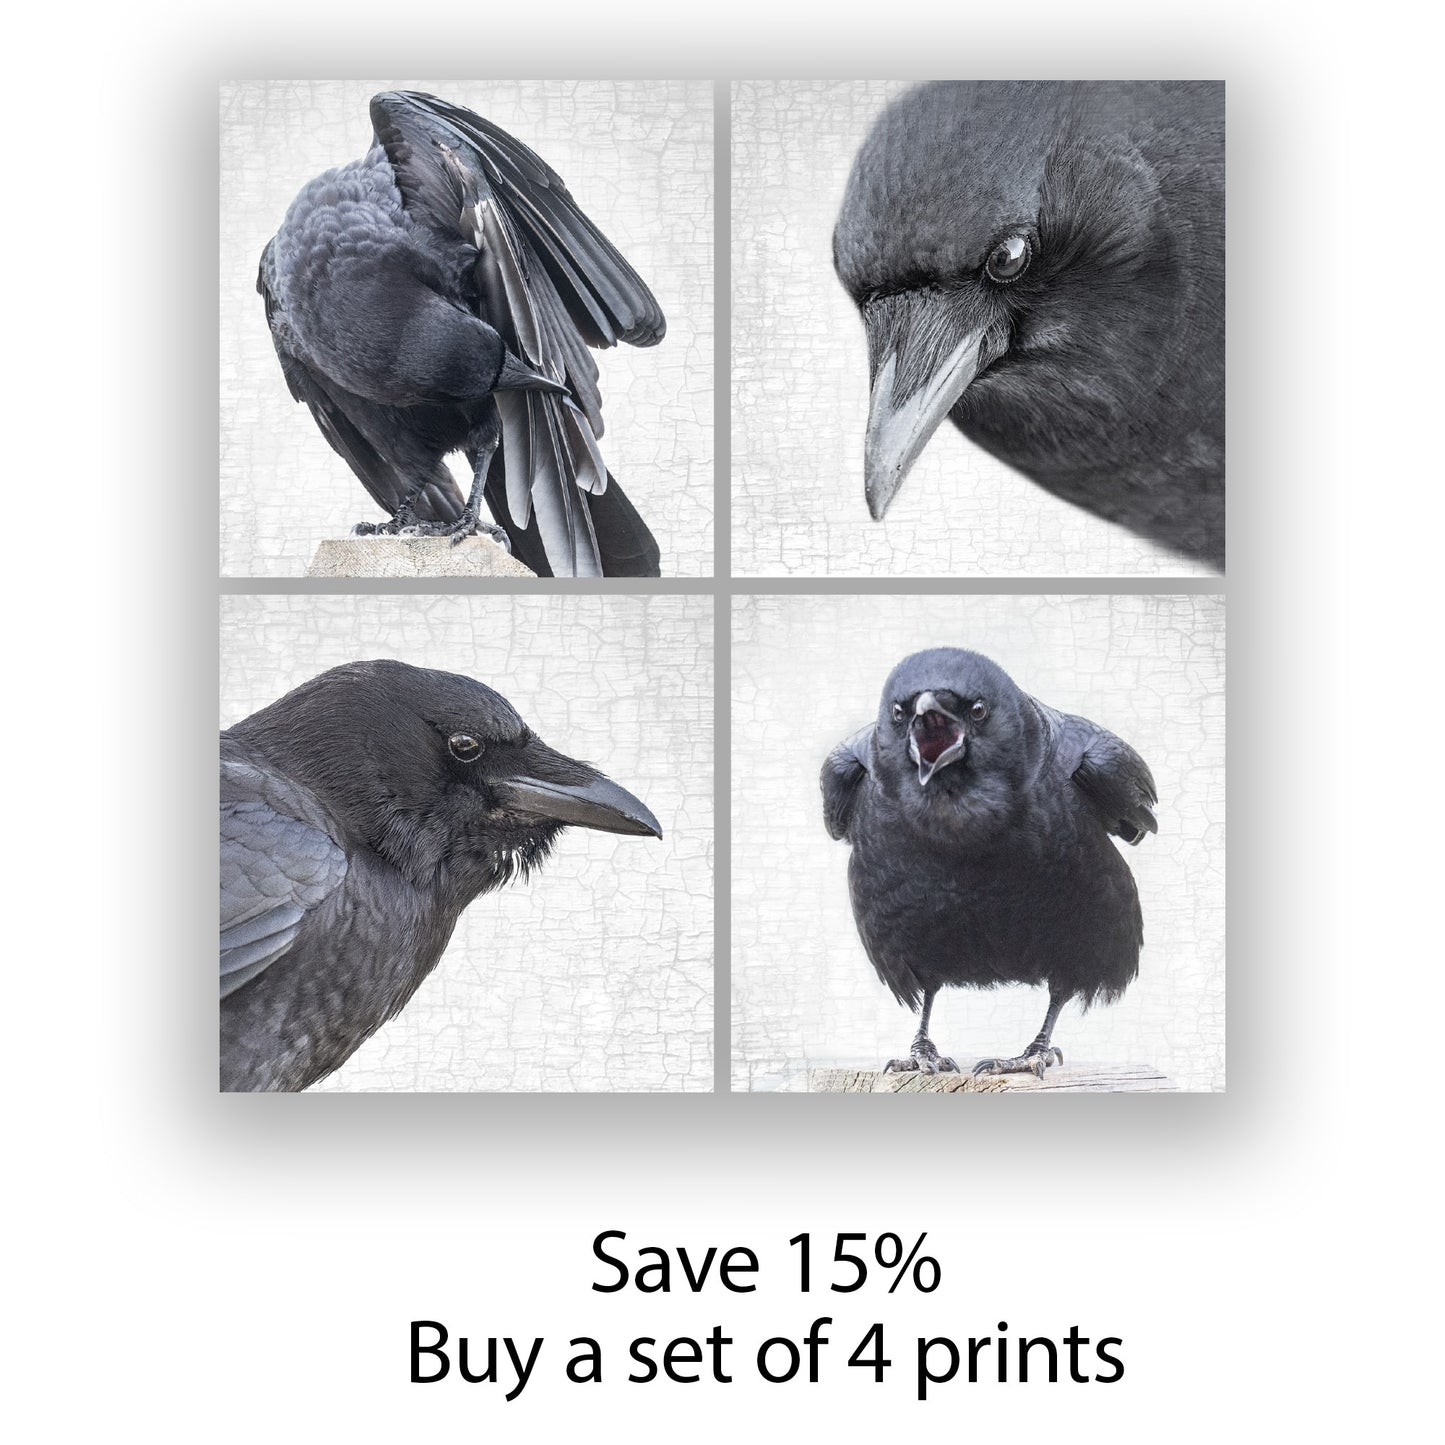 CROW WITHOUT A PEARL EARRING - Fine Art Print, Crow Portrait Series